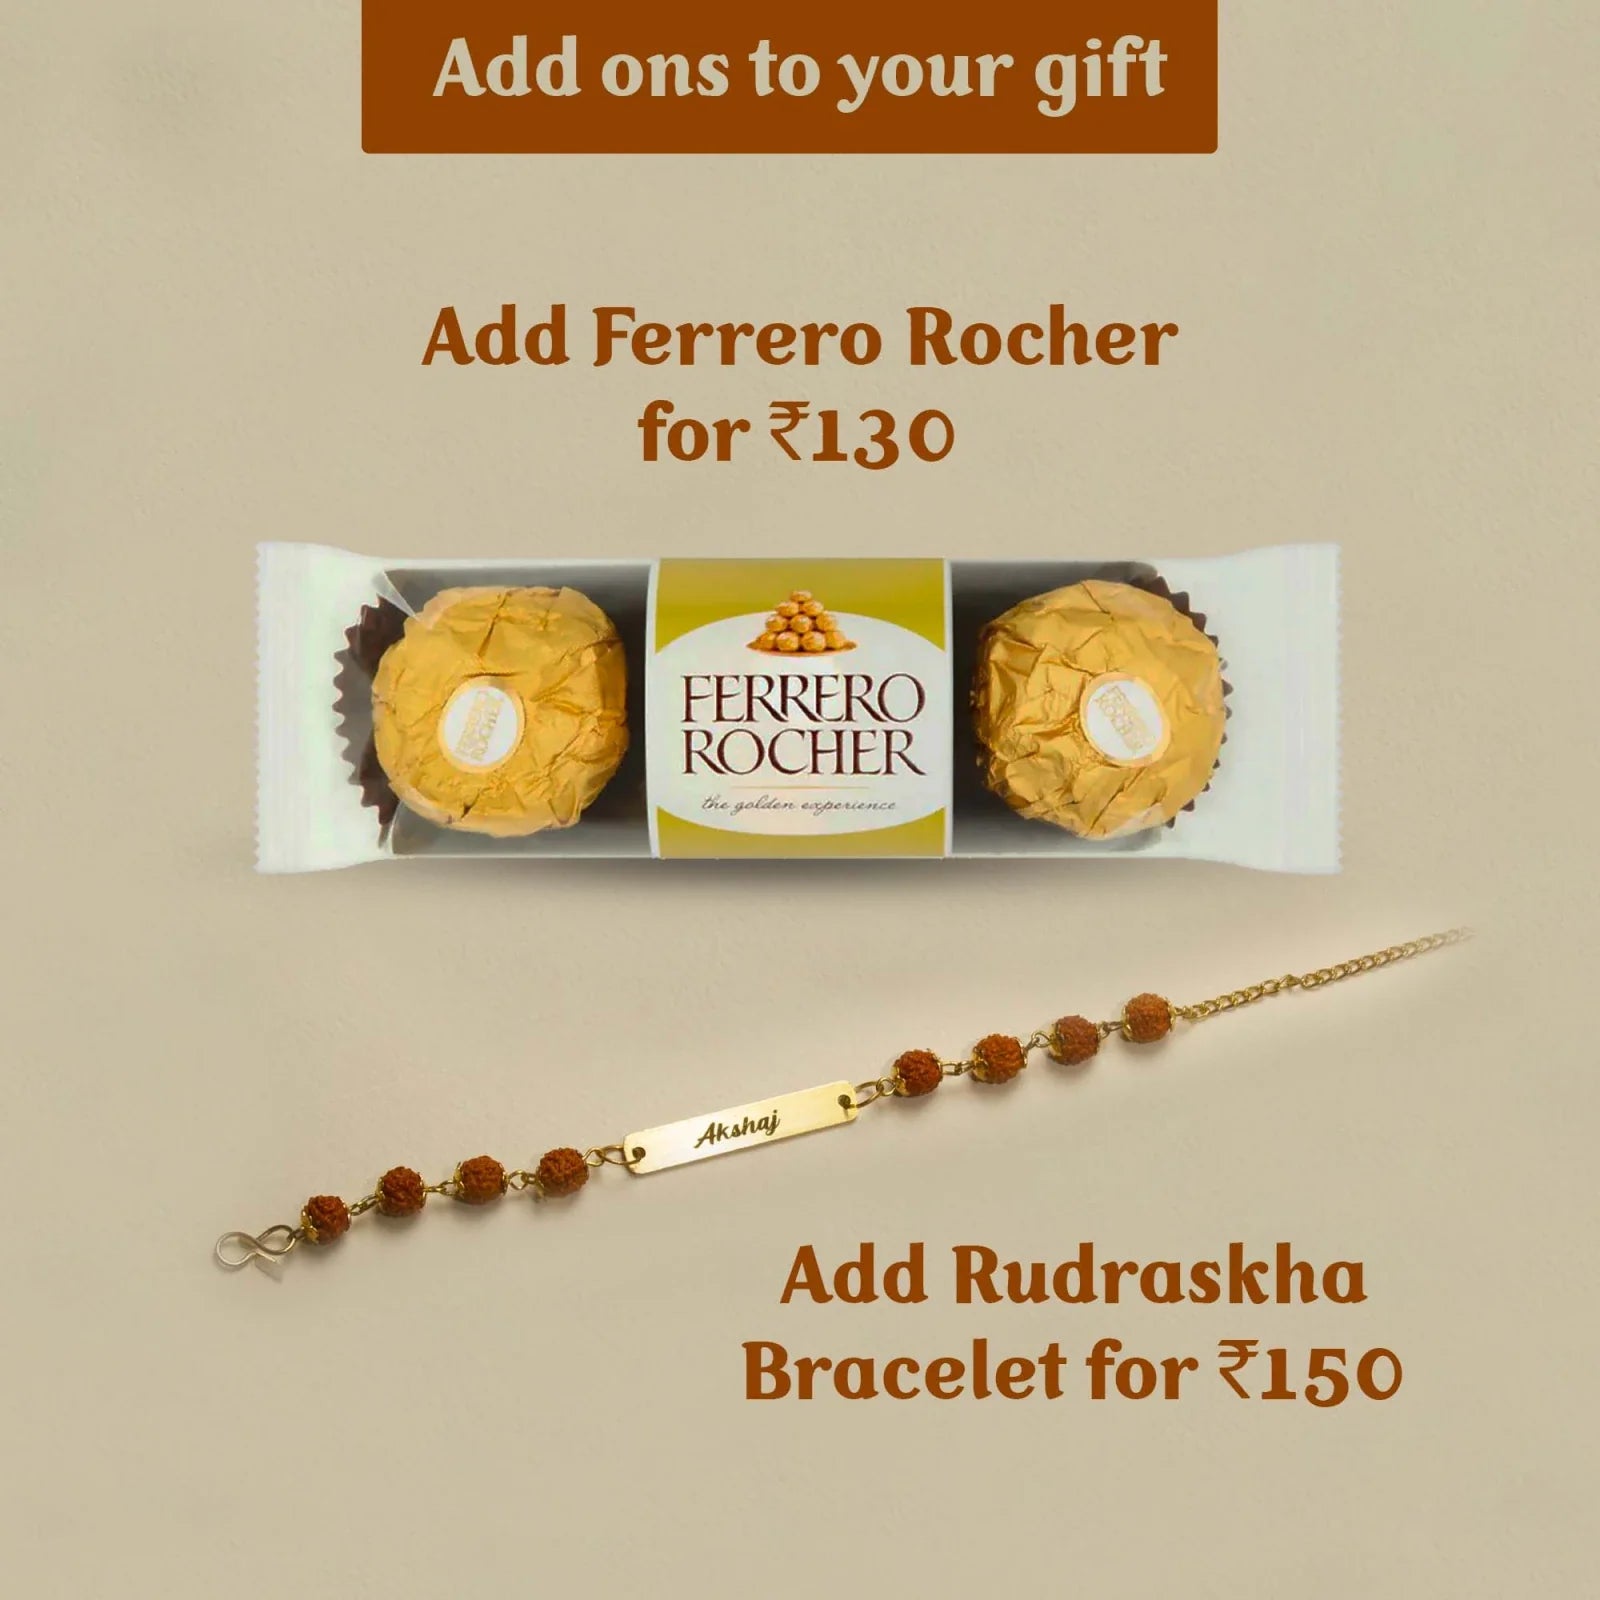 Personalized Travel Wallet (Buttoned) - Olive GreenSweeten the joy of every occasion with the delicious and all-time-favourite ferraro rocher.  Do not miss the elegant and classy rudraksha bracelet for your loved ones.